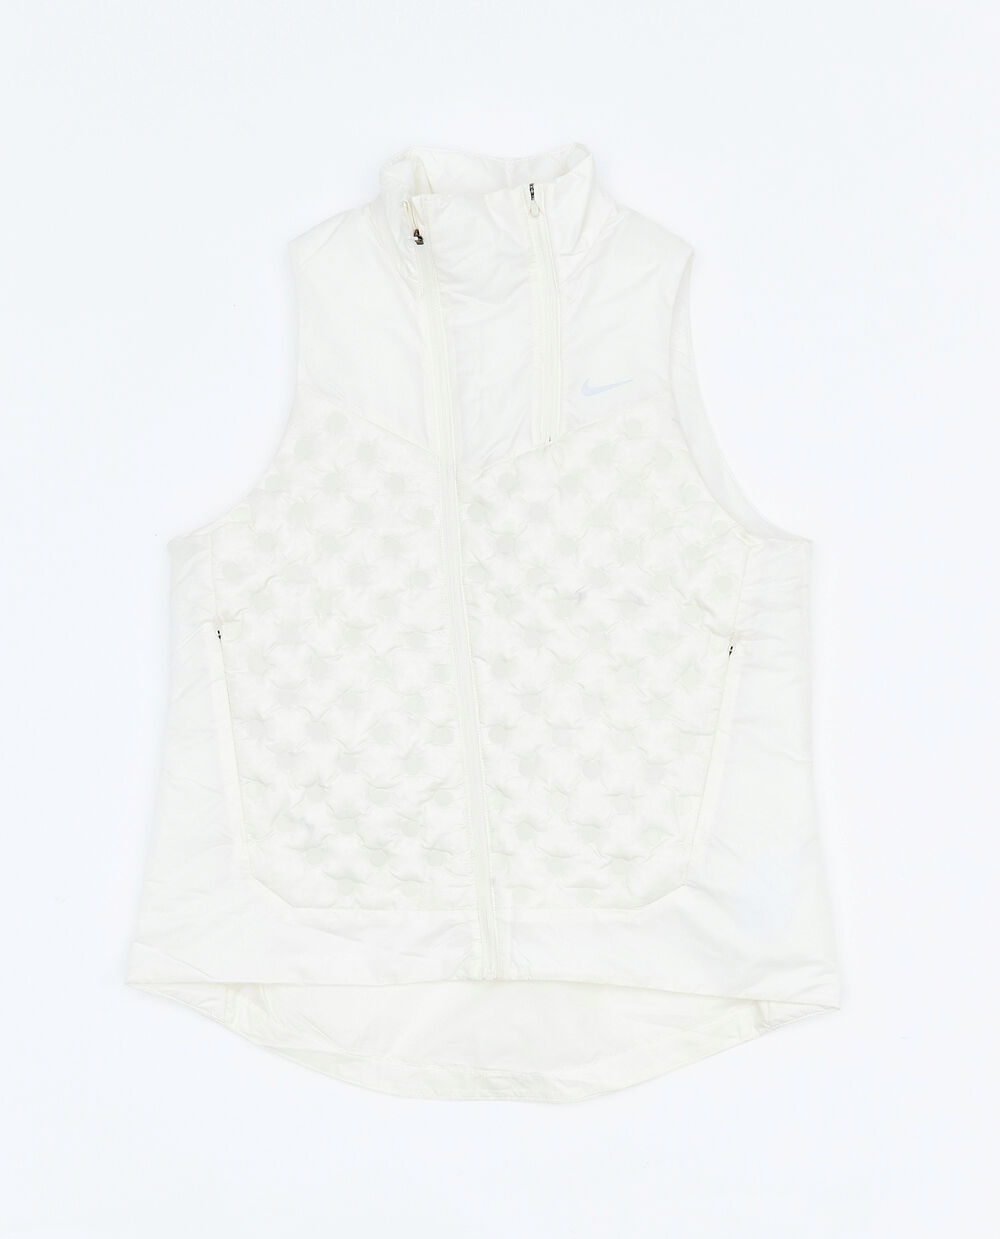 NIKE W THERMA-FIT ADV REPEL RUNNING VEST